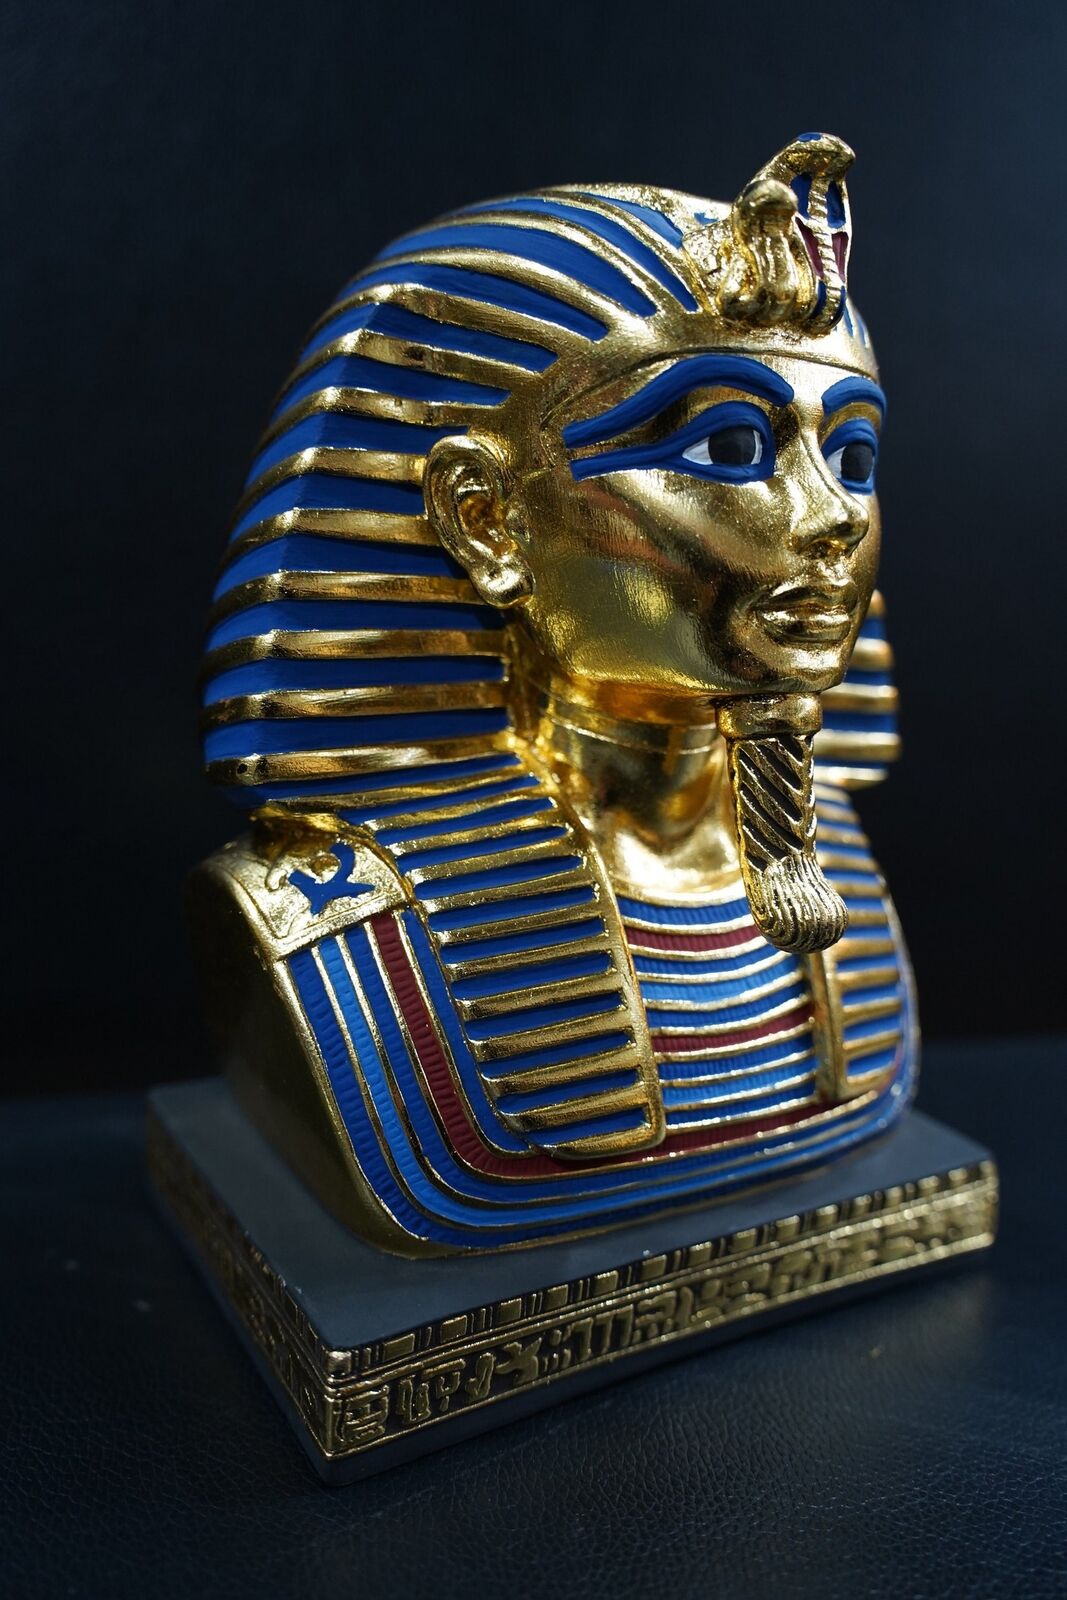 King Tutankhamun: Egypt's Young Pharaoh and Icon of Ancient History